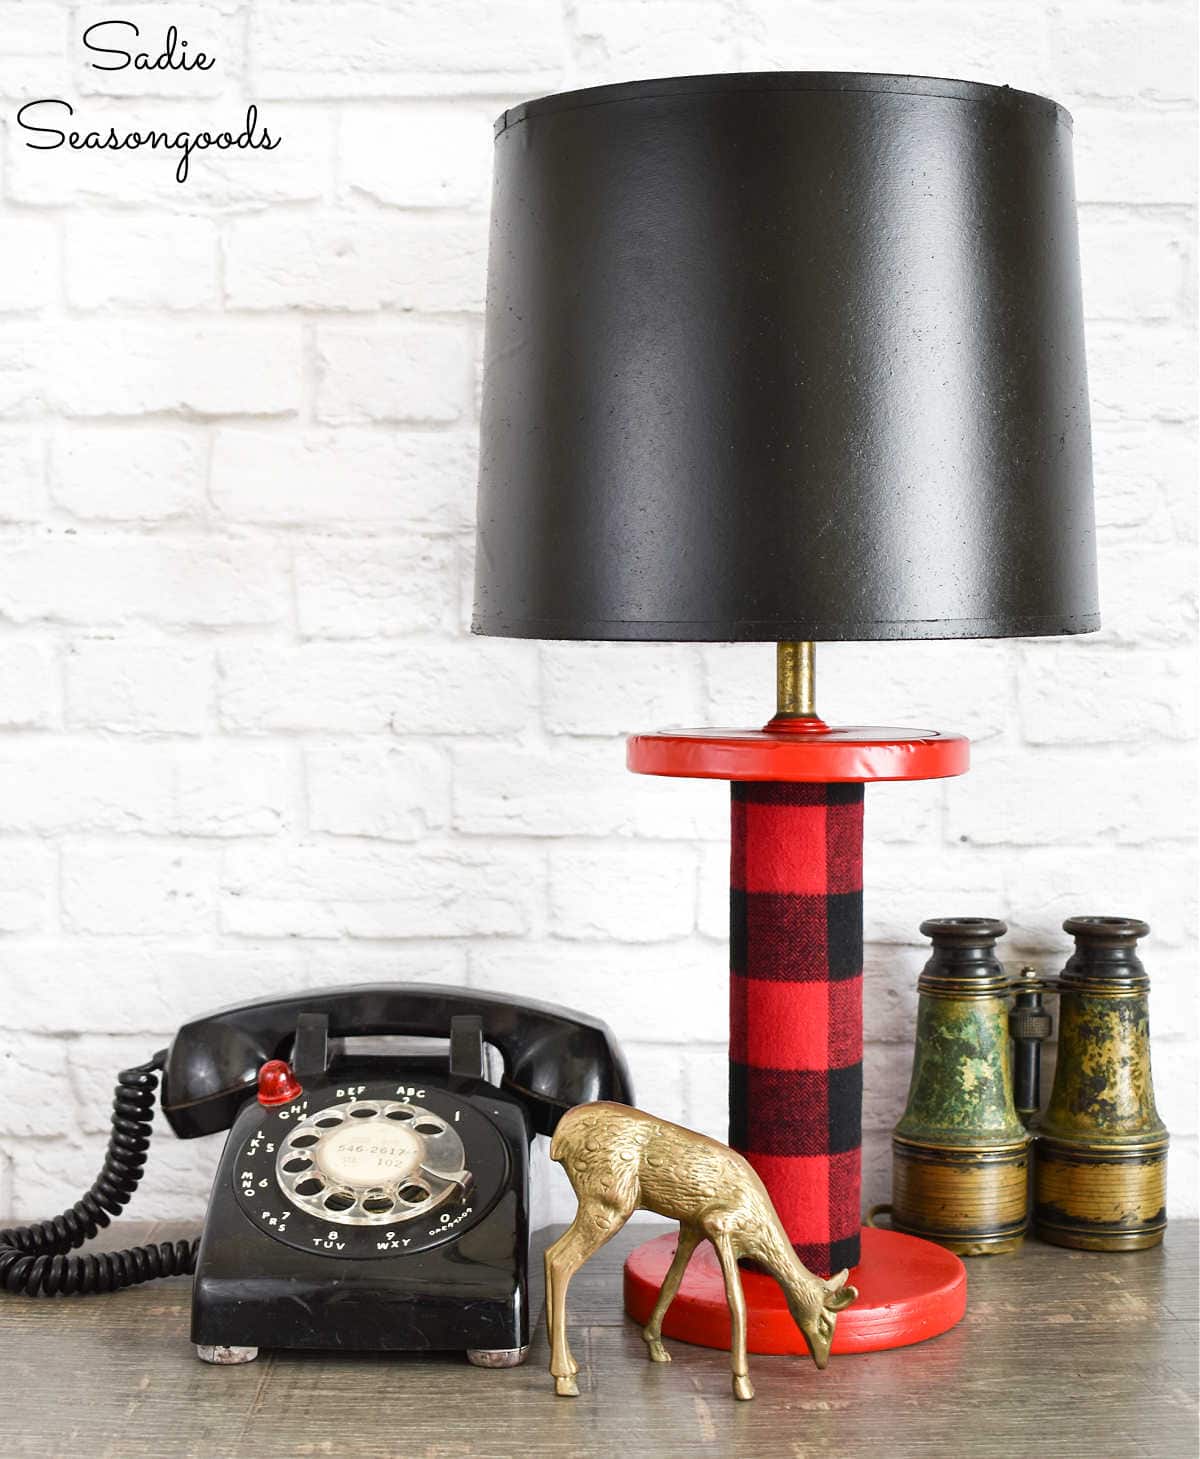 fabric wrapped lamp from crafting with flannel